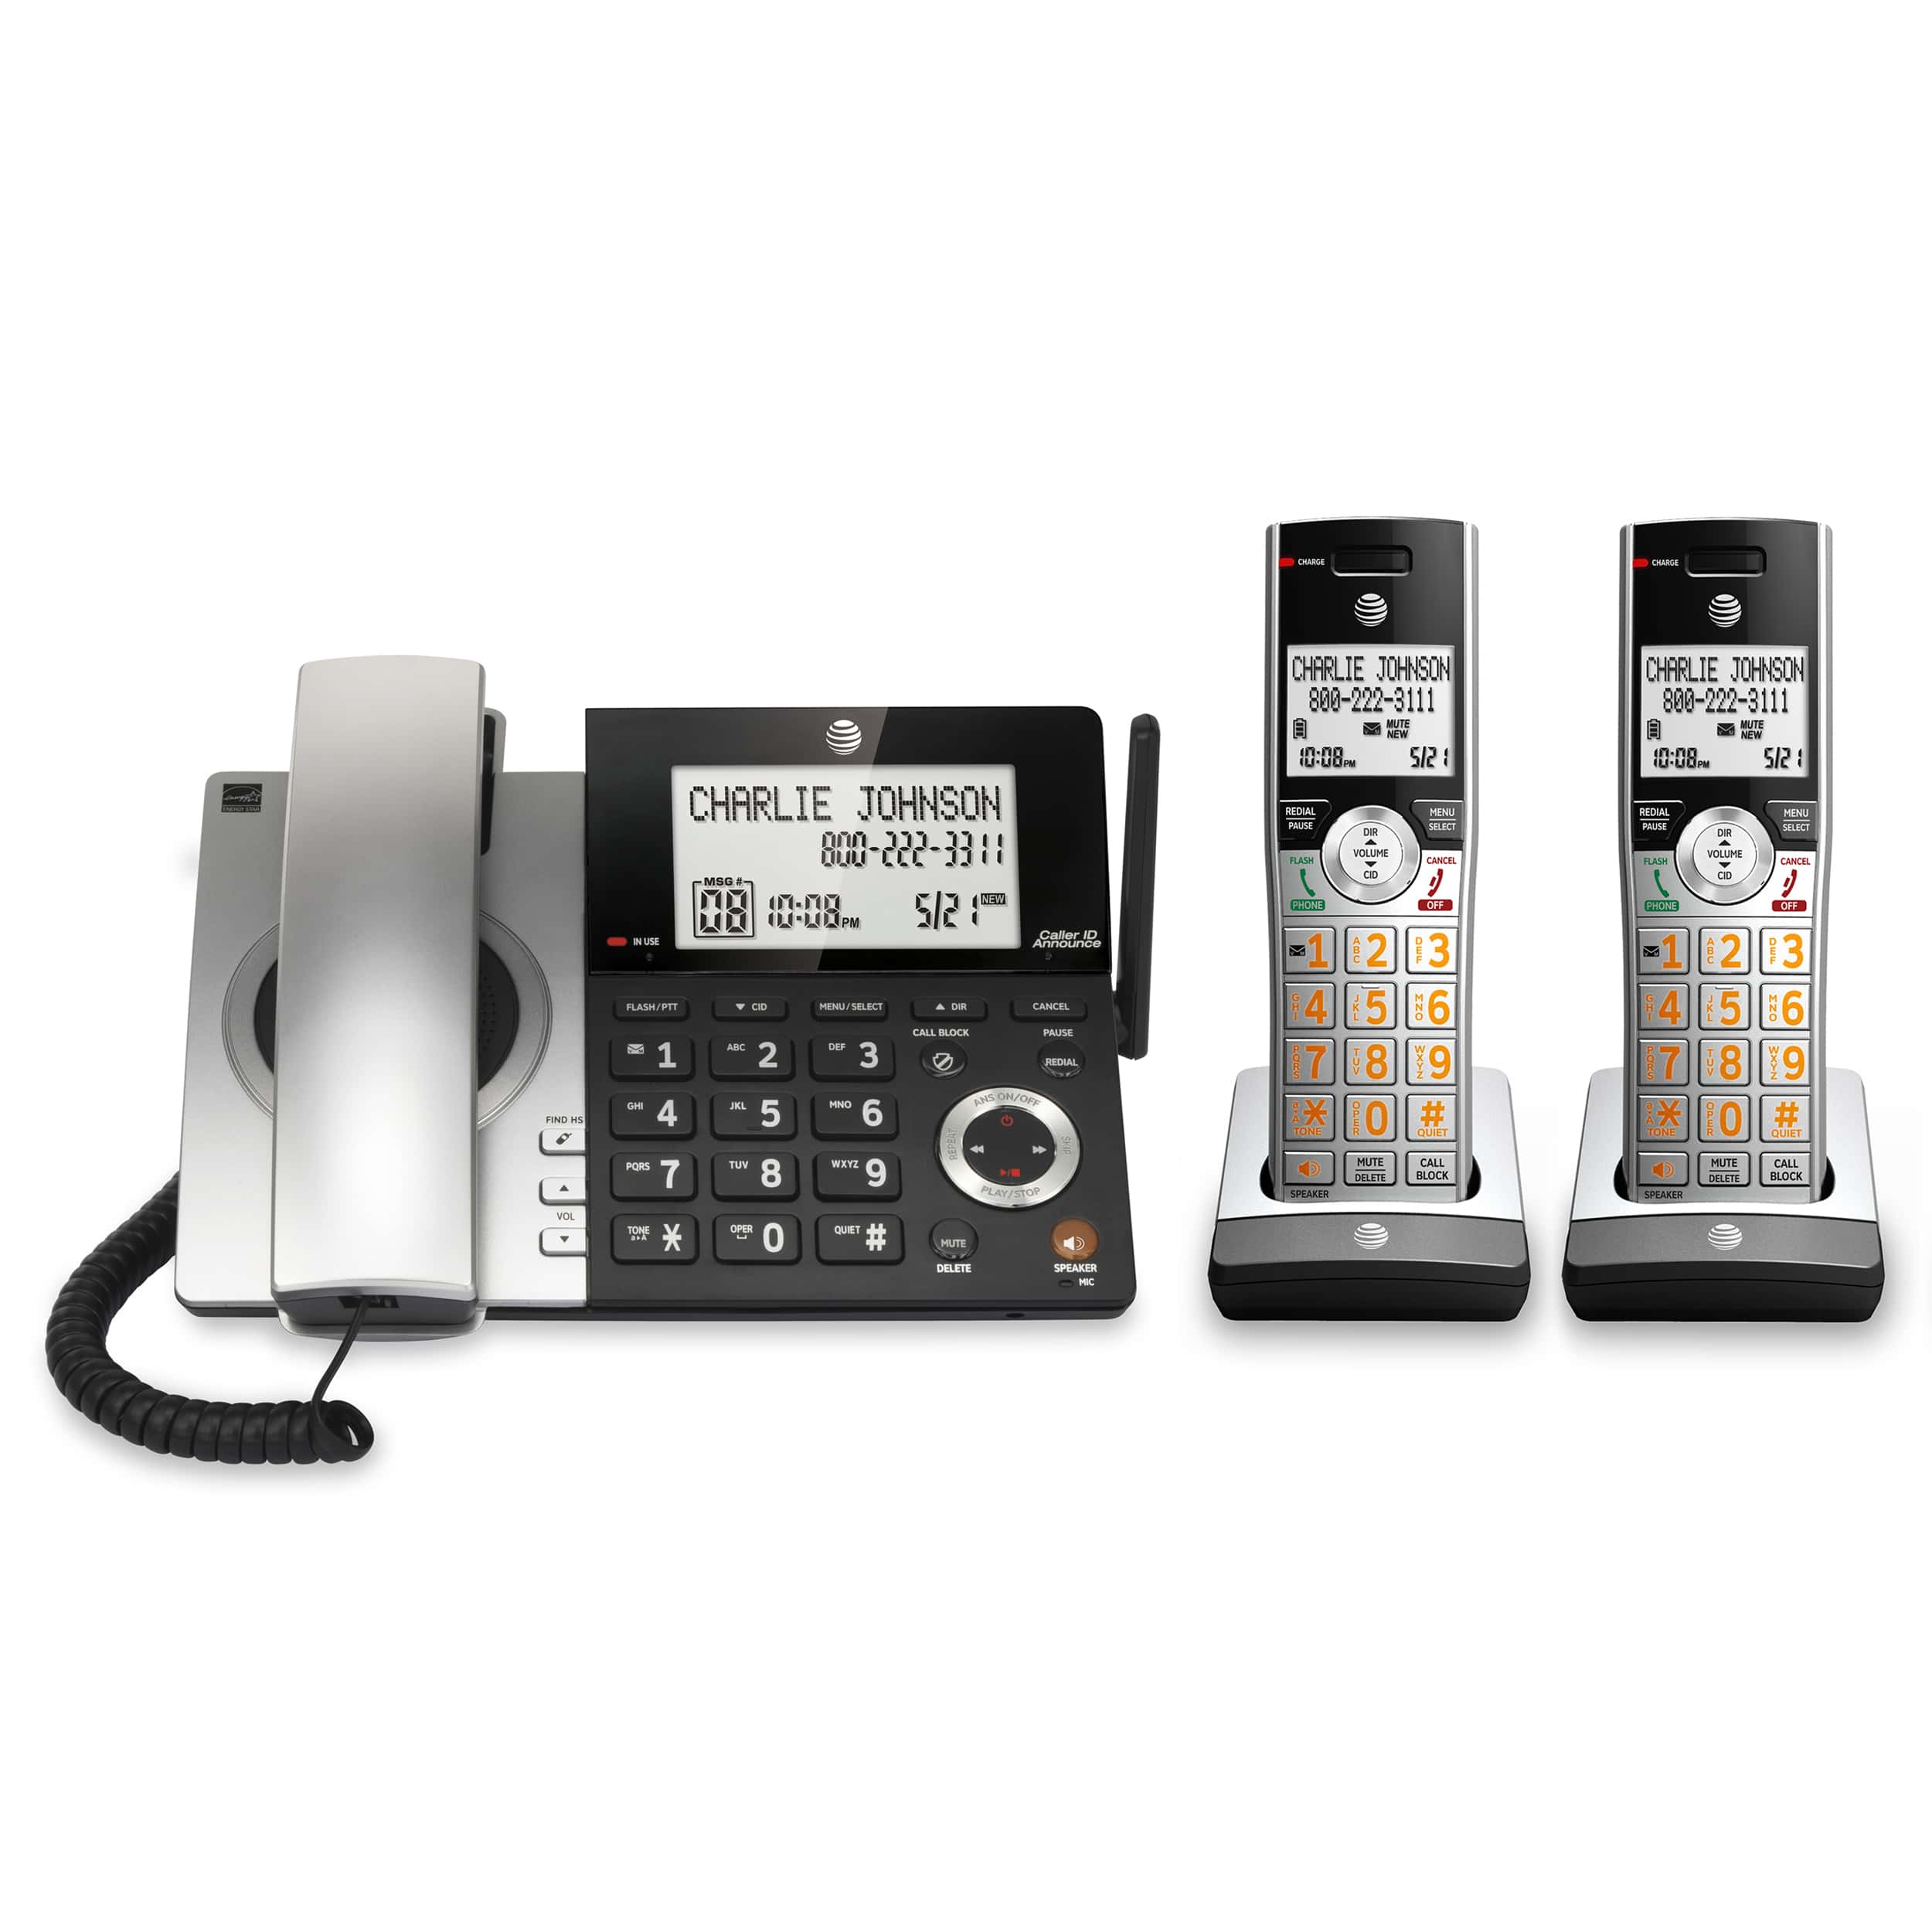 2 handset corded/cordless phone system with smart call blocker - view 1